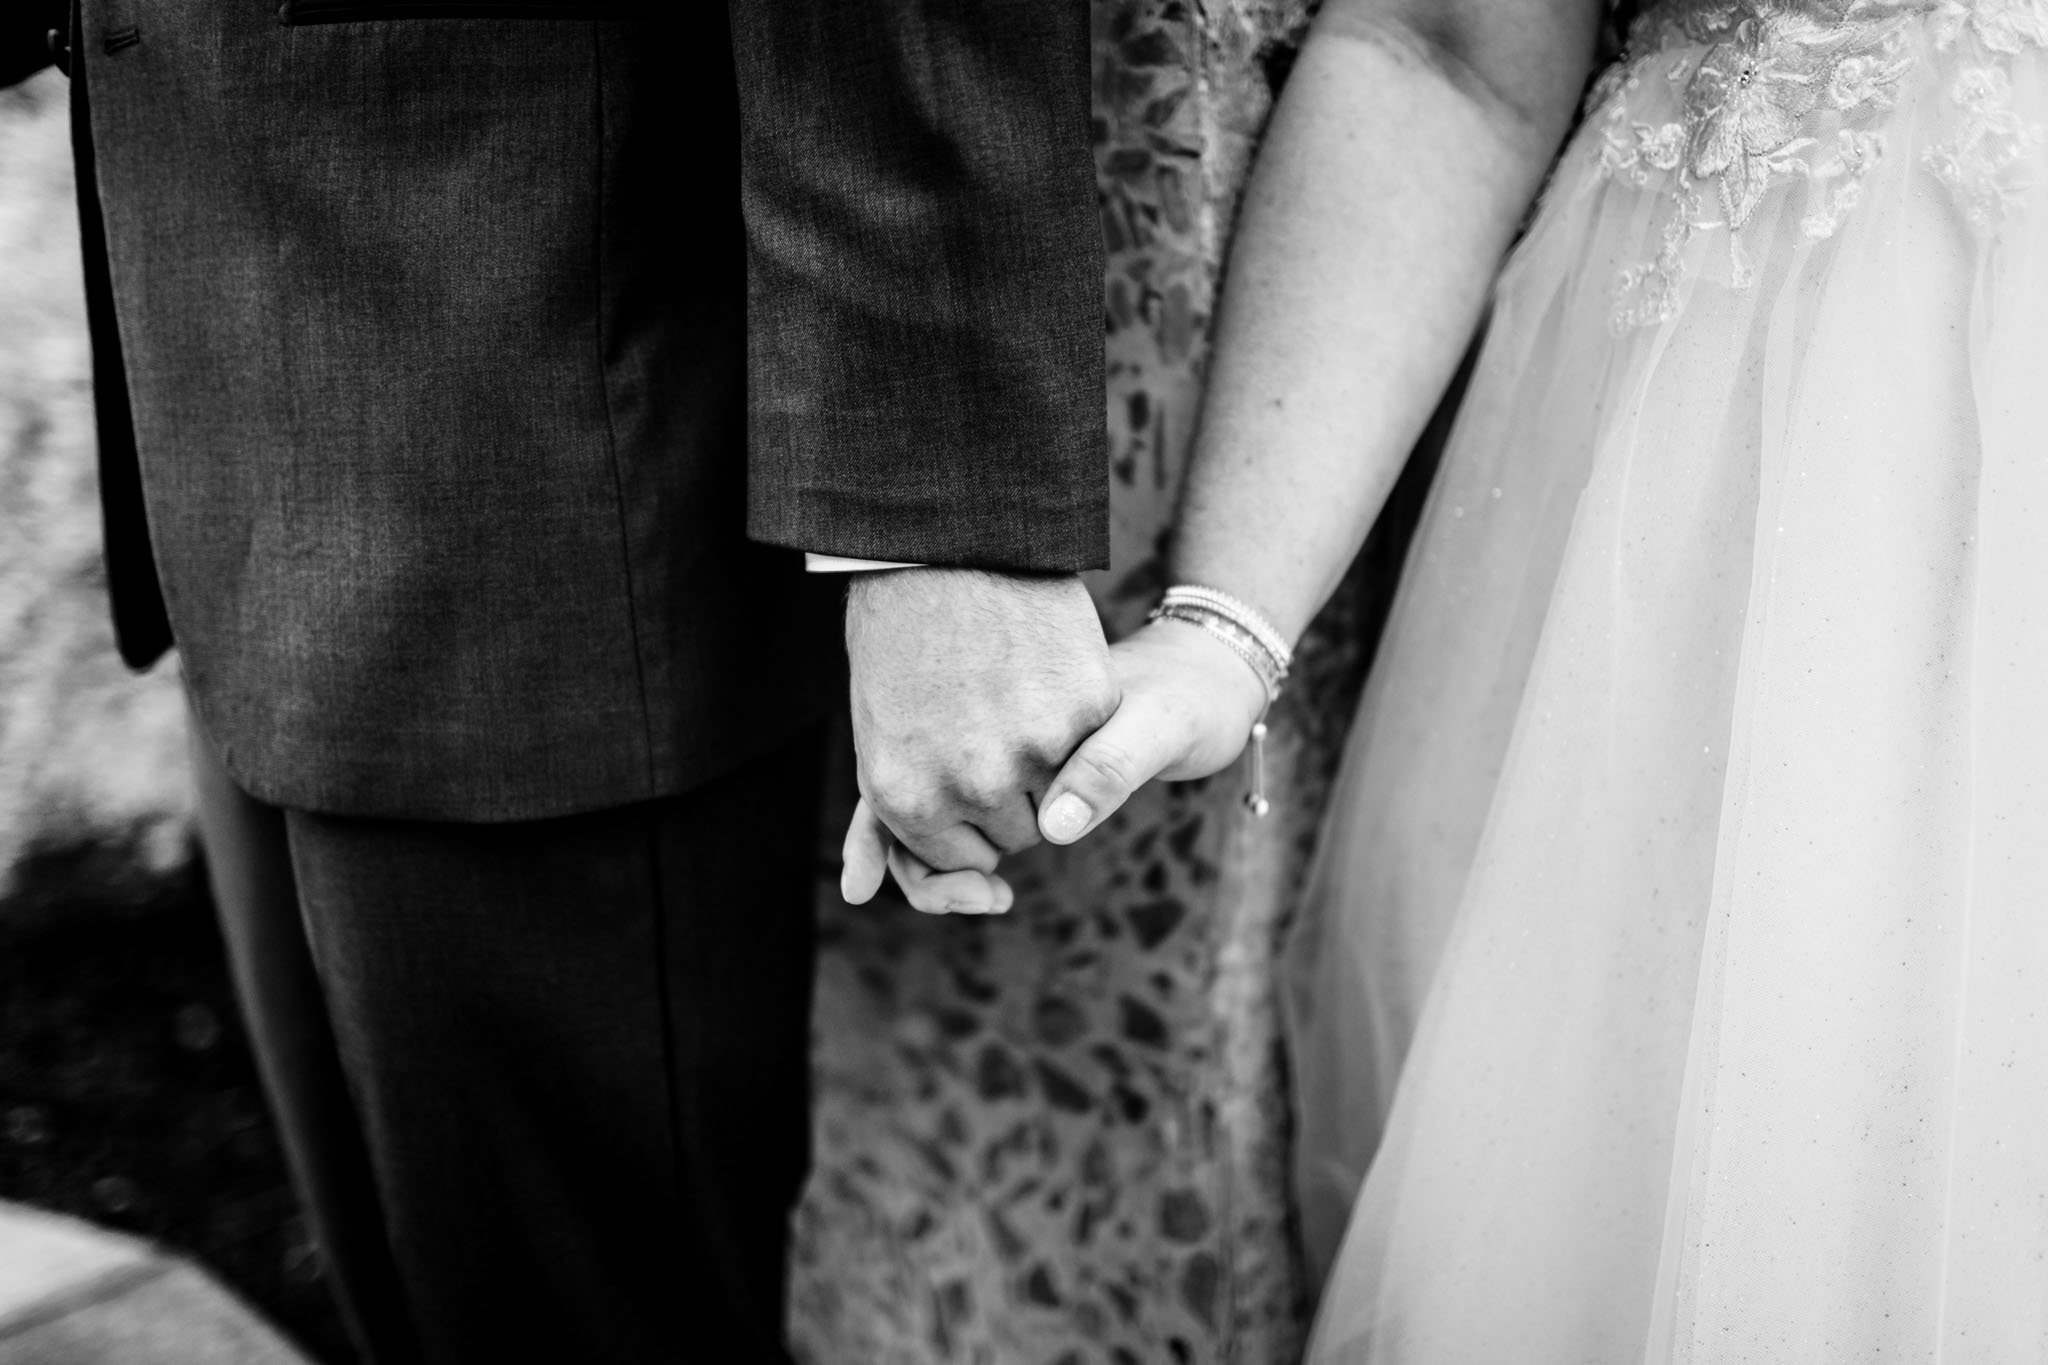 Haw River Ballroom Wedding | Durham Photographer | By G. Lin Photography | Black and white photo of bride and groom holding hands